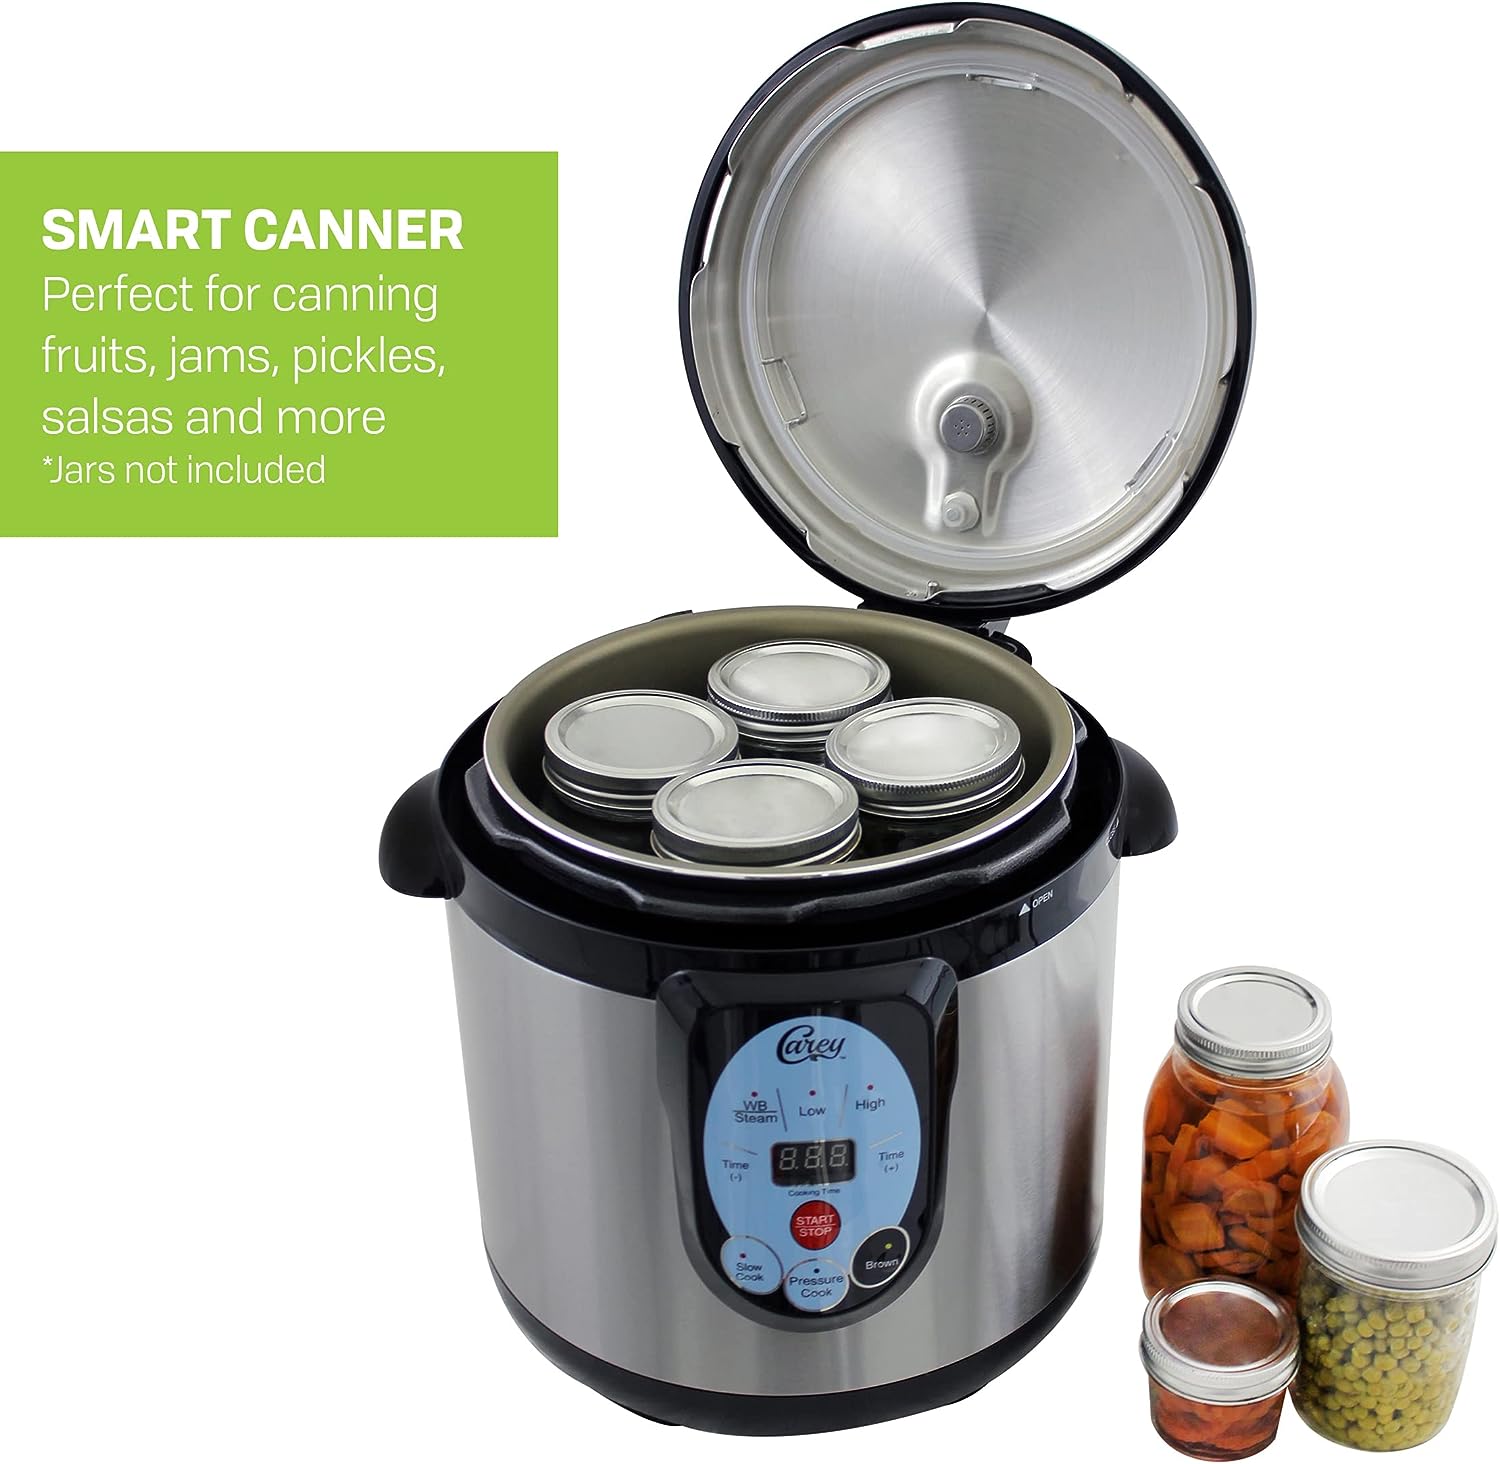 https://bigbigmart.com/wp-content/uploads/2023/08/CAREY-DPC-9SS-Smart-Electric-Pressure-Cooker-and-Canner-Stainless-Steel-9.5-Qt3.jpg